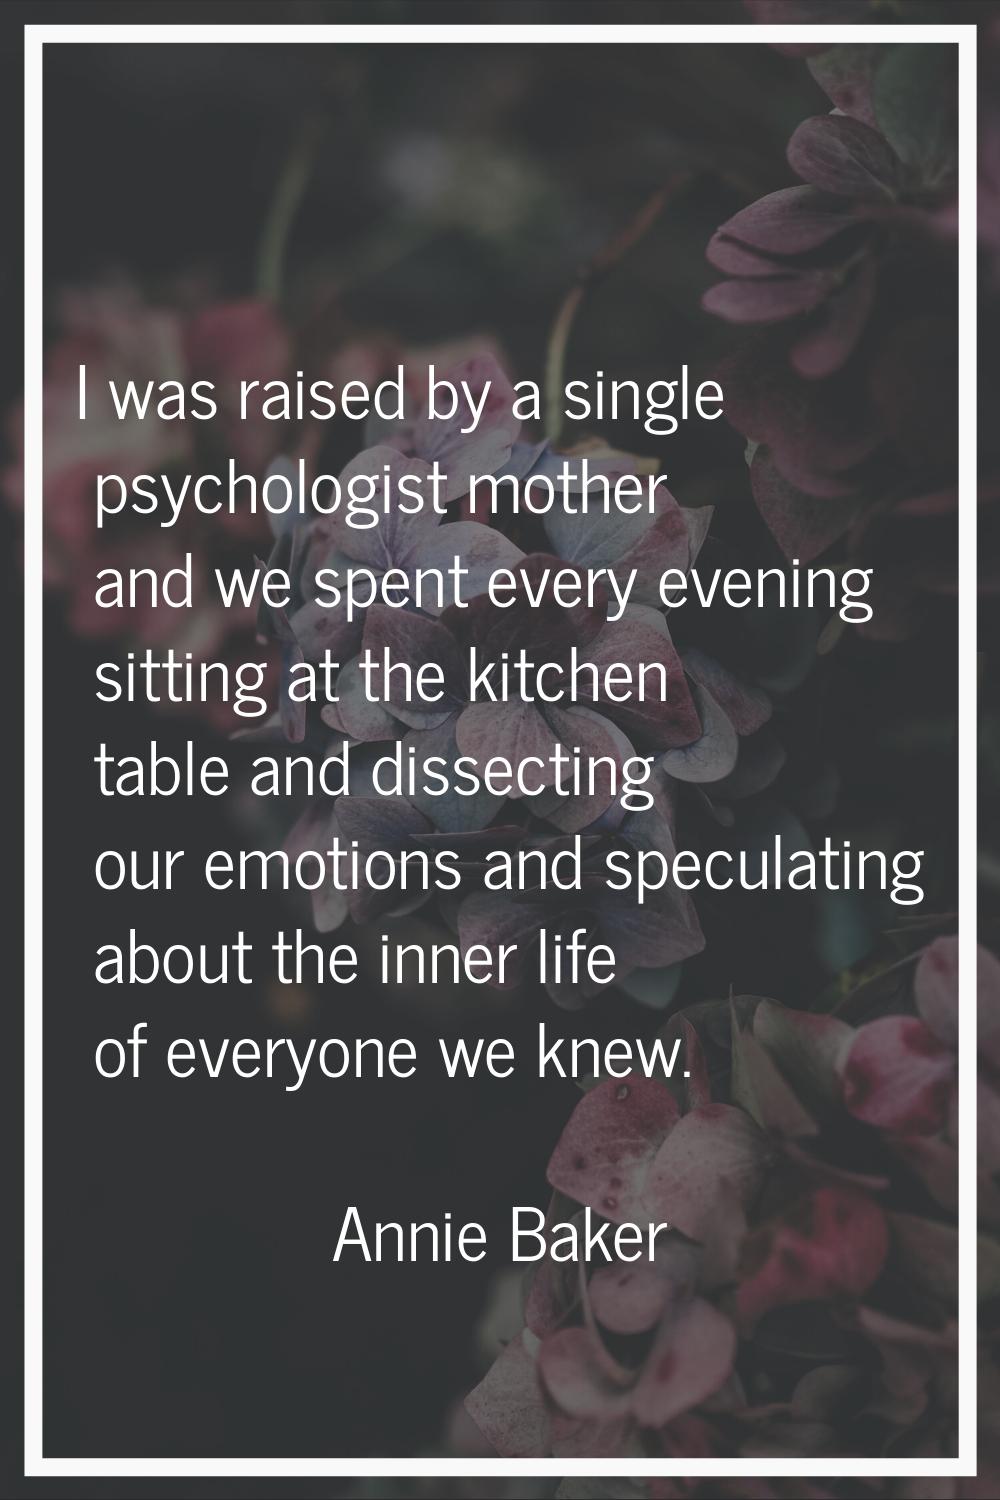 I was raised by a single psychologist mother and we spent every evening sitting at the kitchen tabl